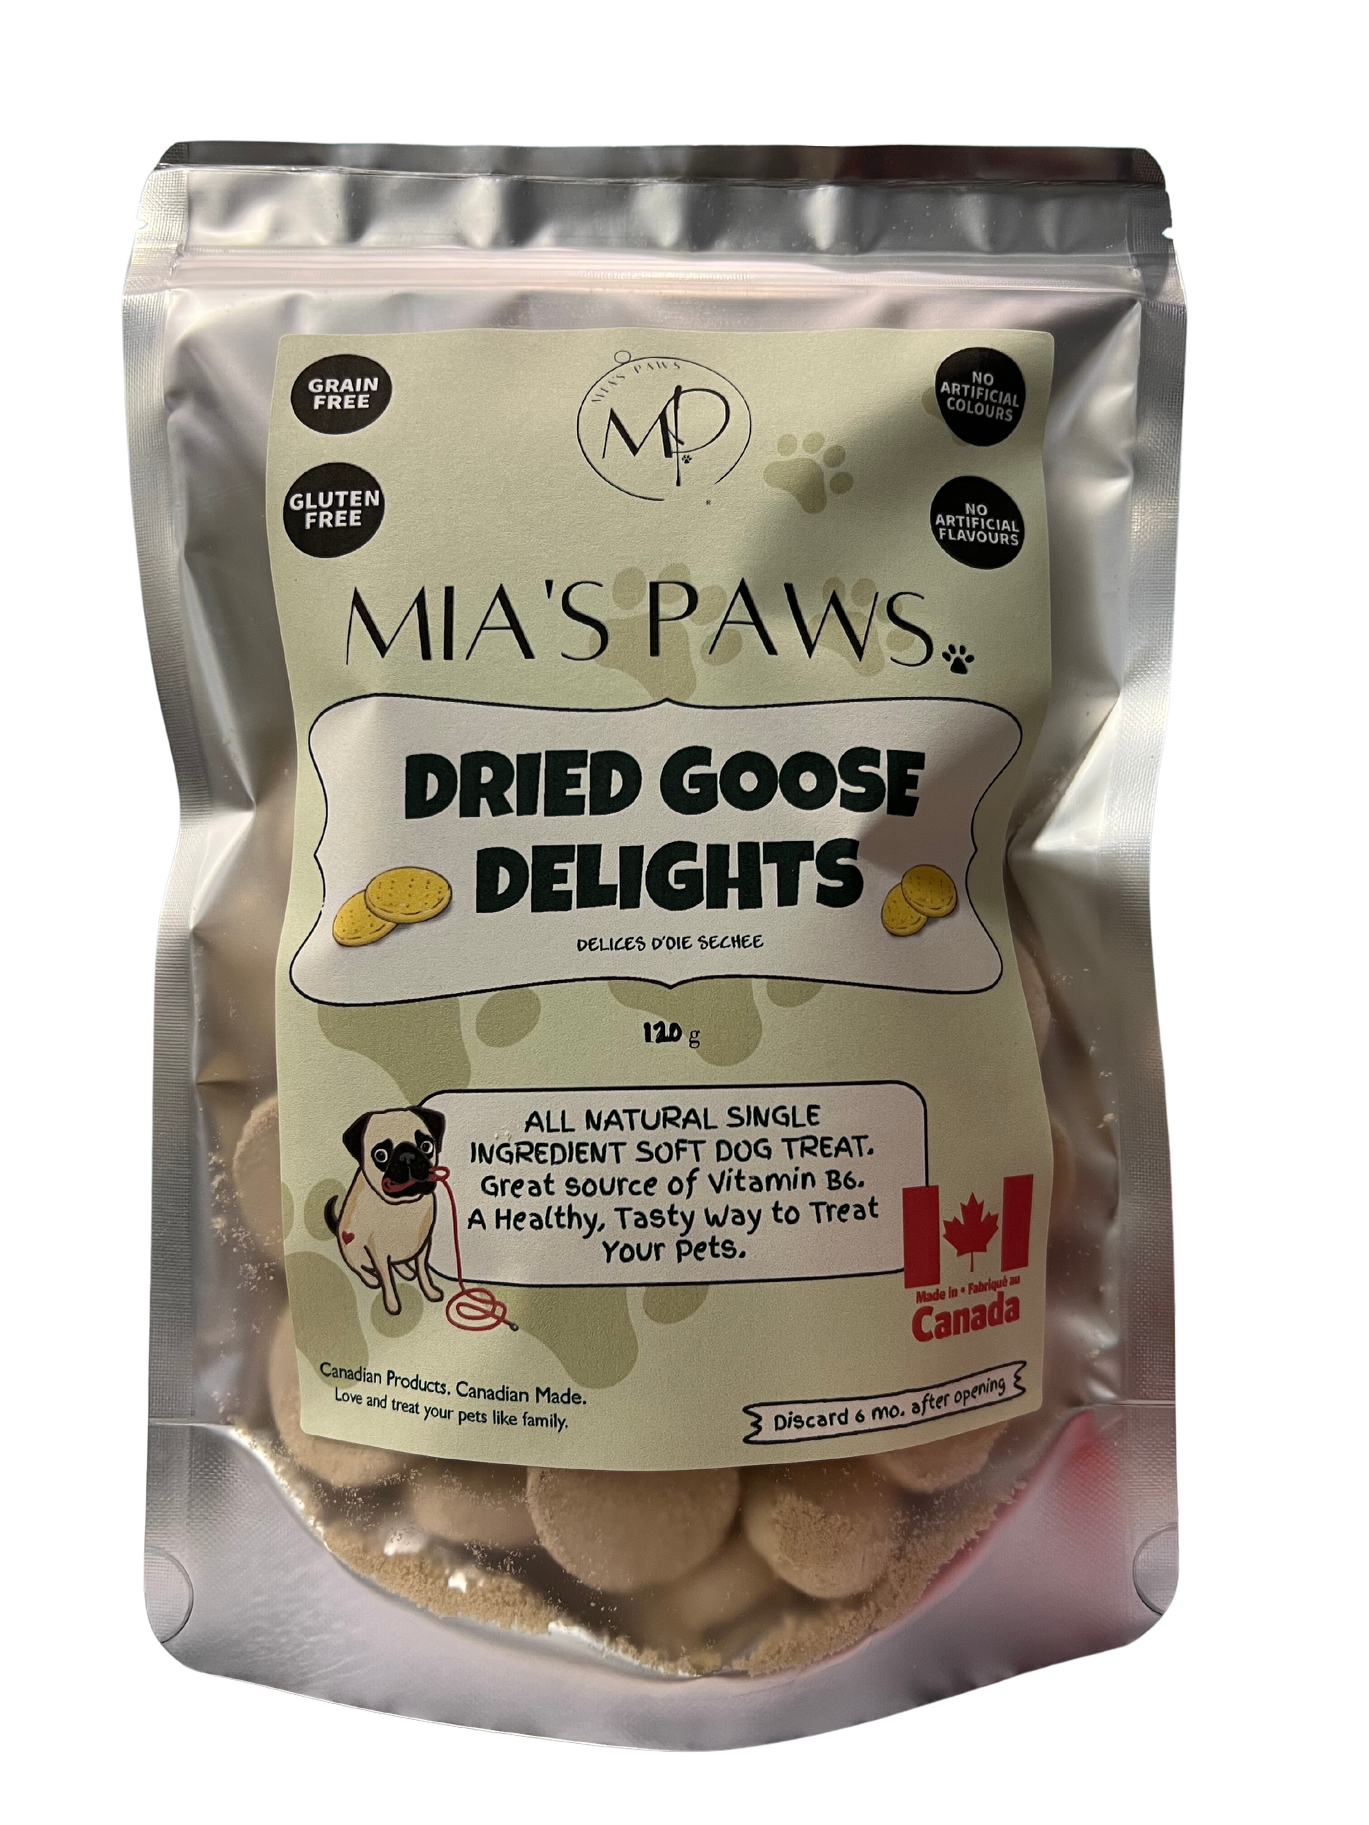 Dried Goose Delights - Mia's Paws